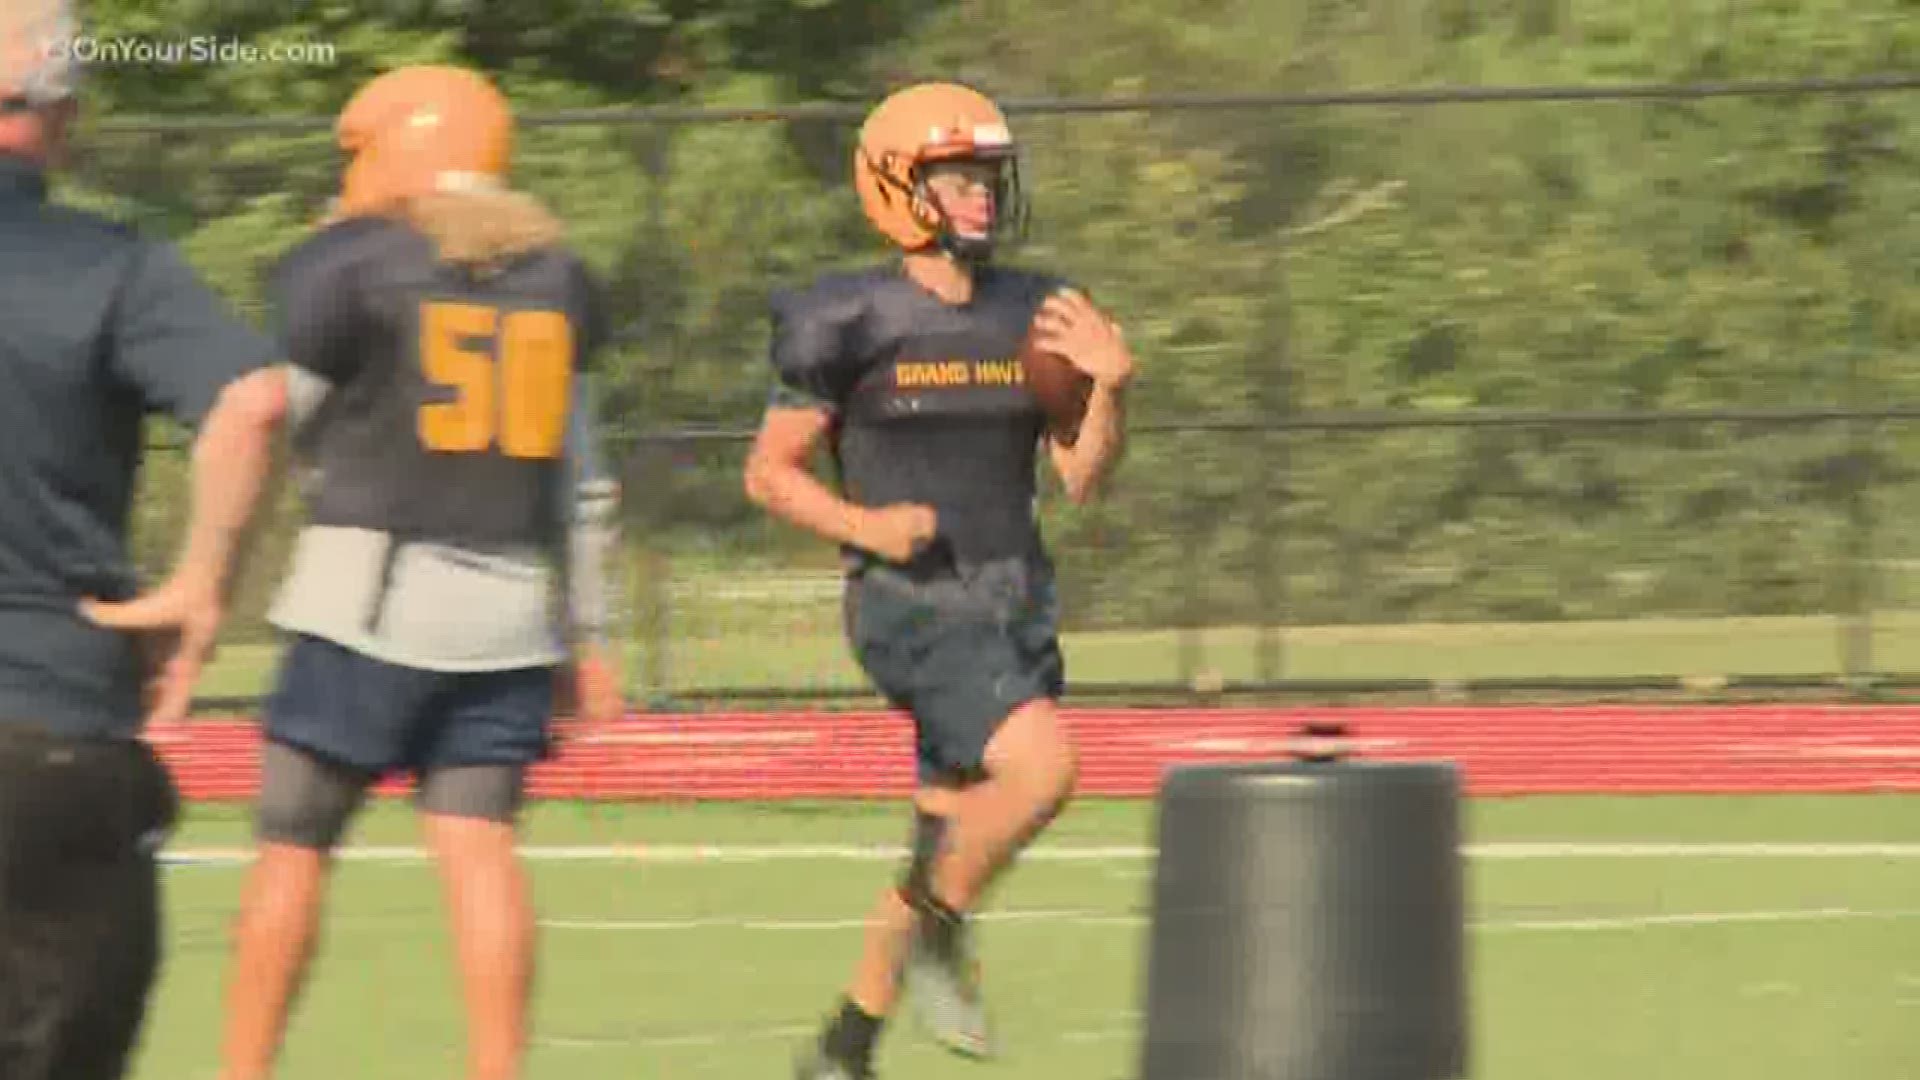 13 On Your Sidelines Two-A-Days: Grand Haven leaning on experienced players